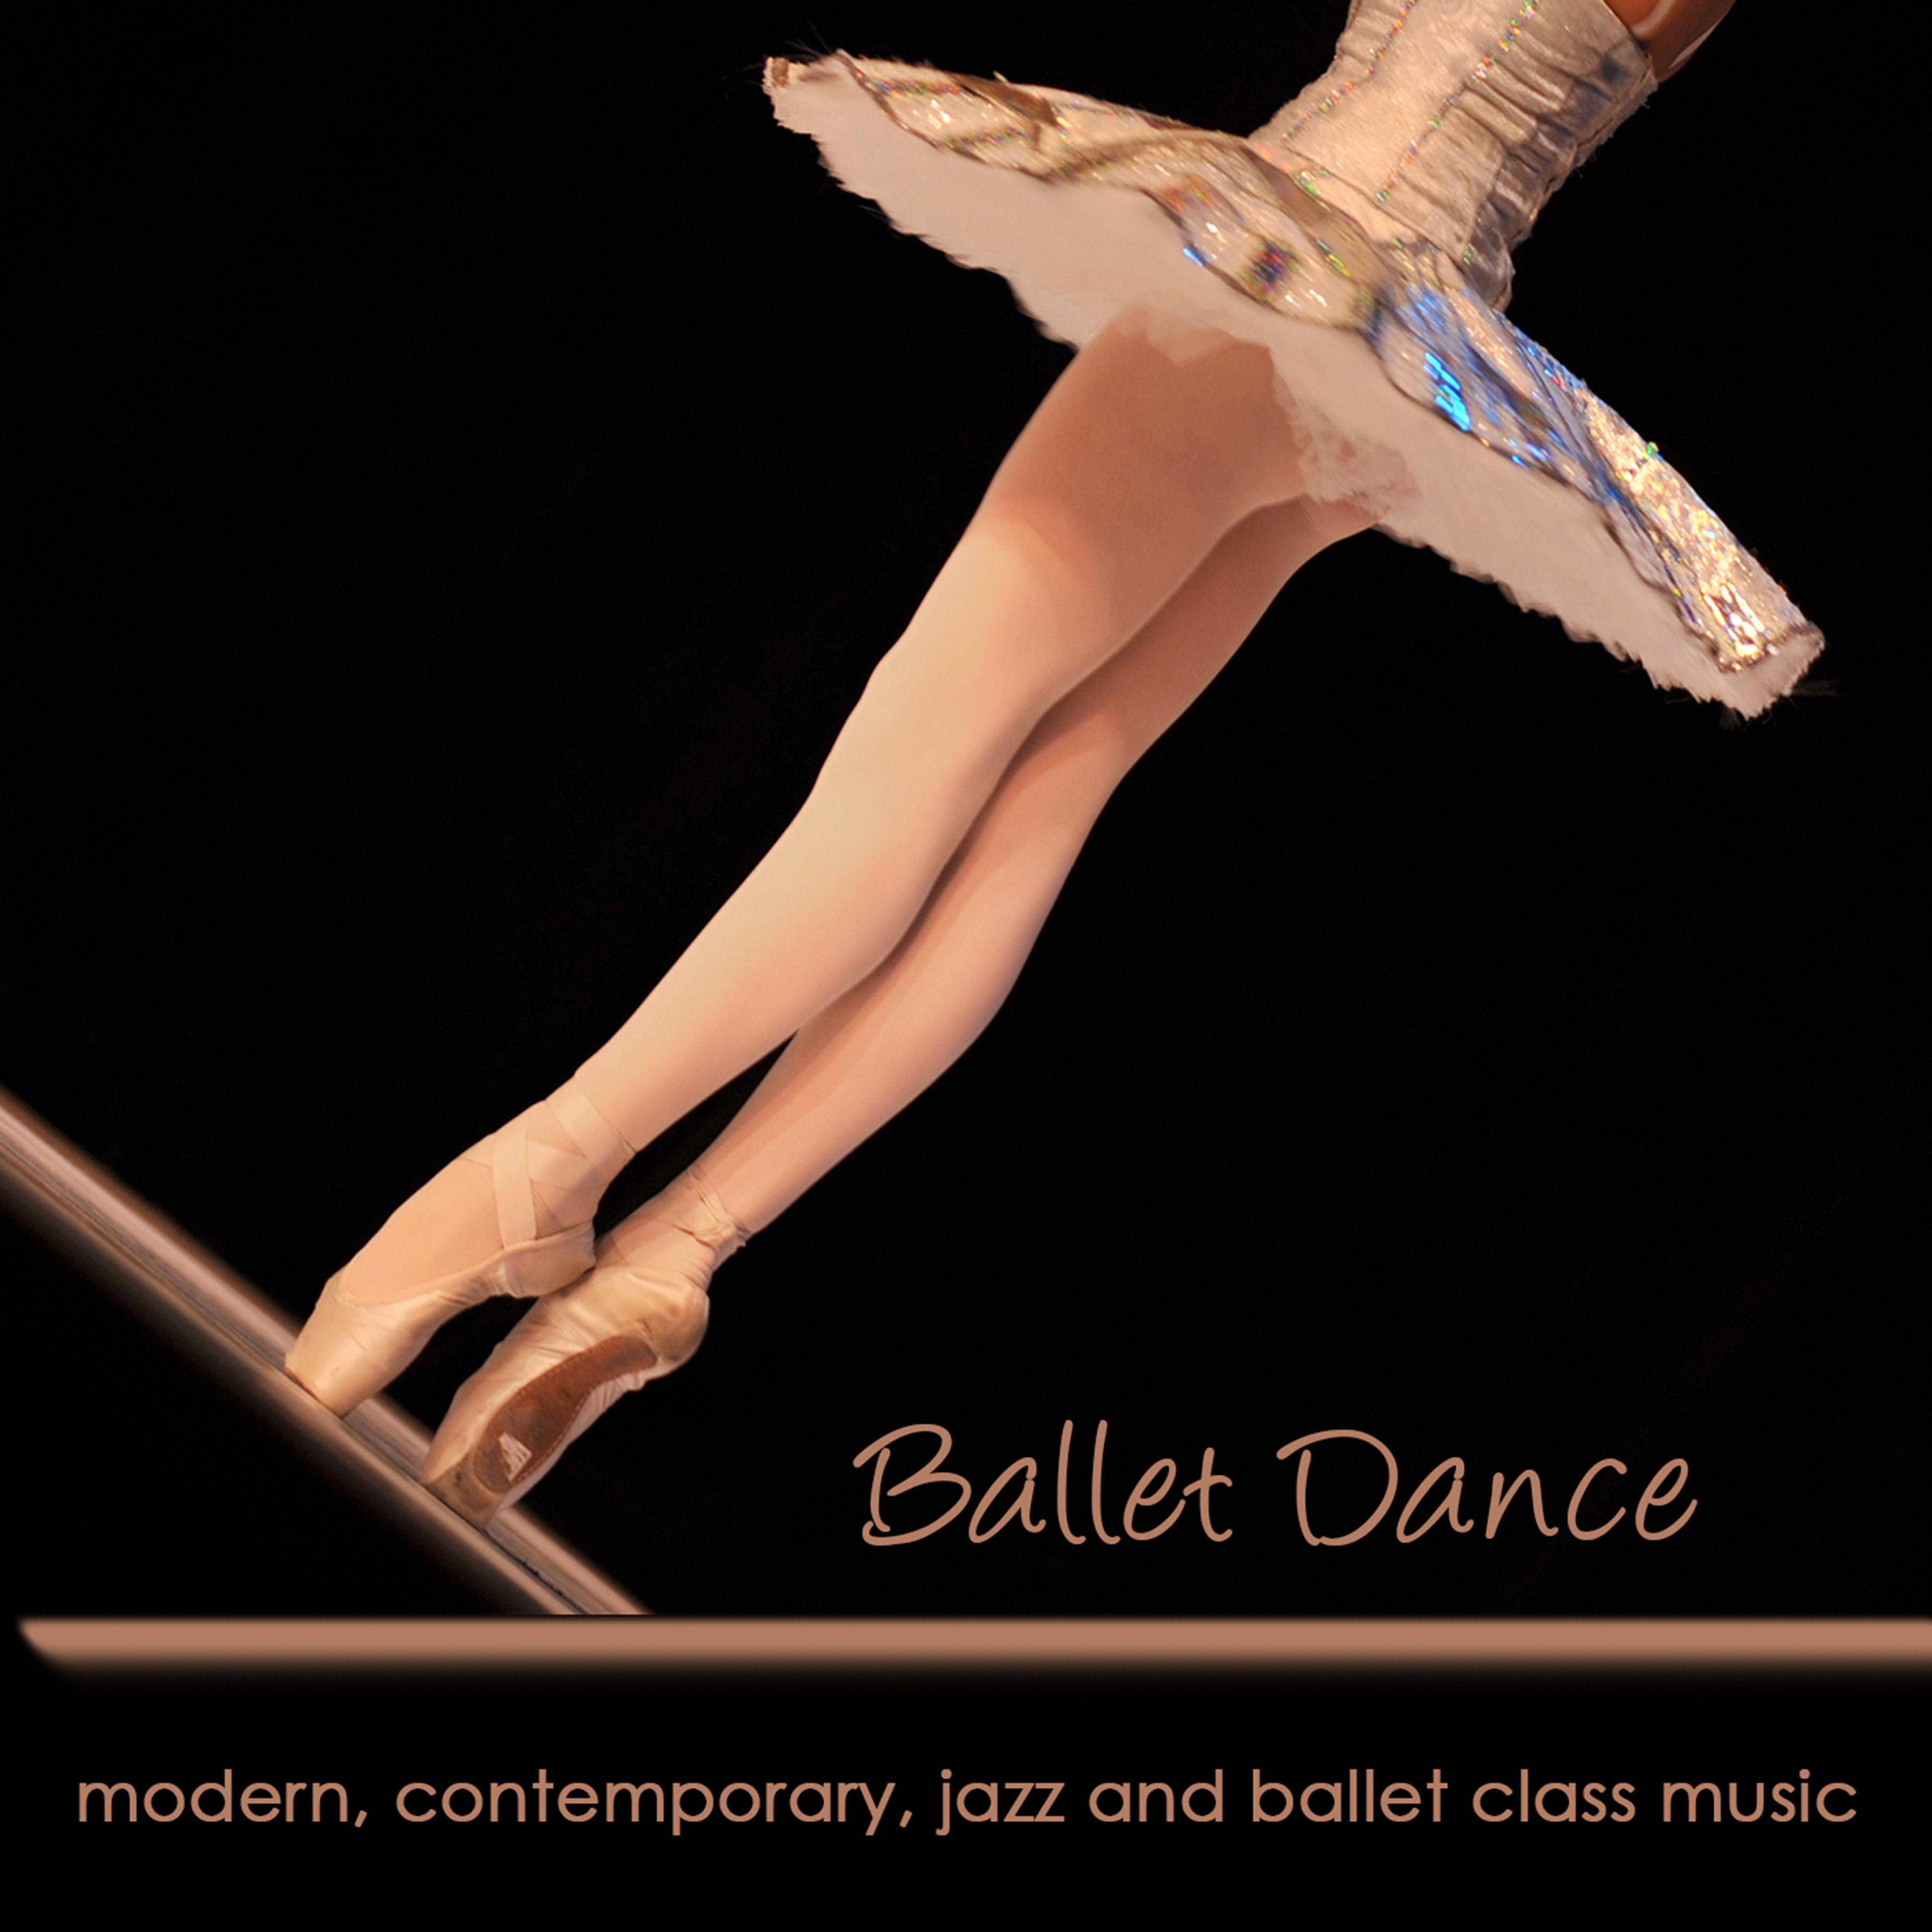 Ballet Dance - Modern, Contemporary, Jazz and Ballet Class Music, Instrumental Piano, Musette and Classical Songs Lounge Version for Dance Classes